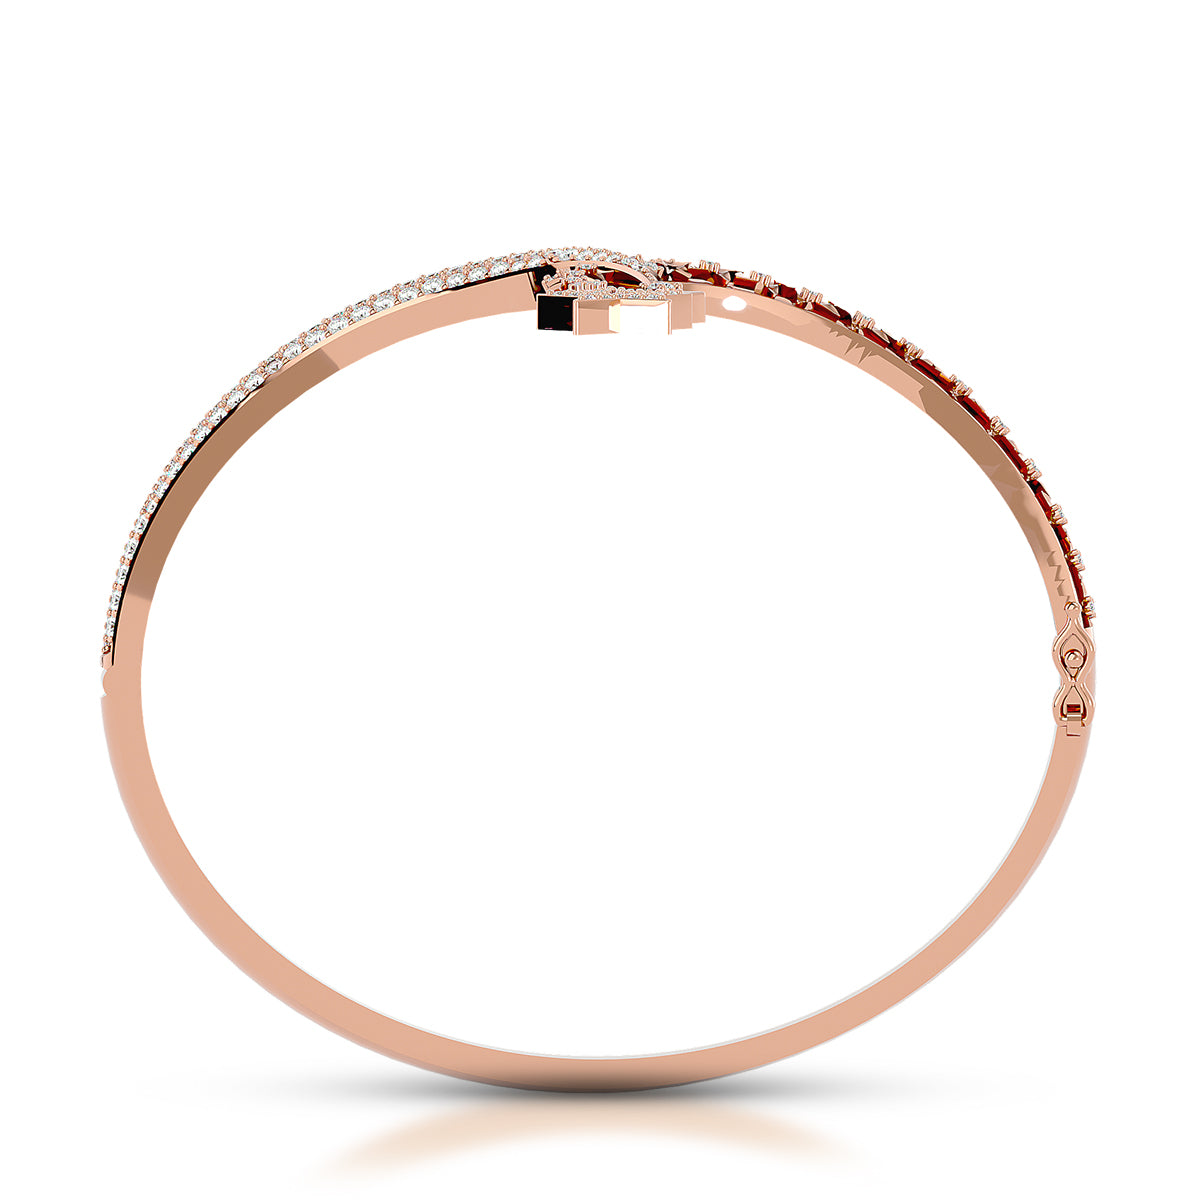 Connection Hinged Bangle Rose Gold With Diamonds